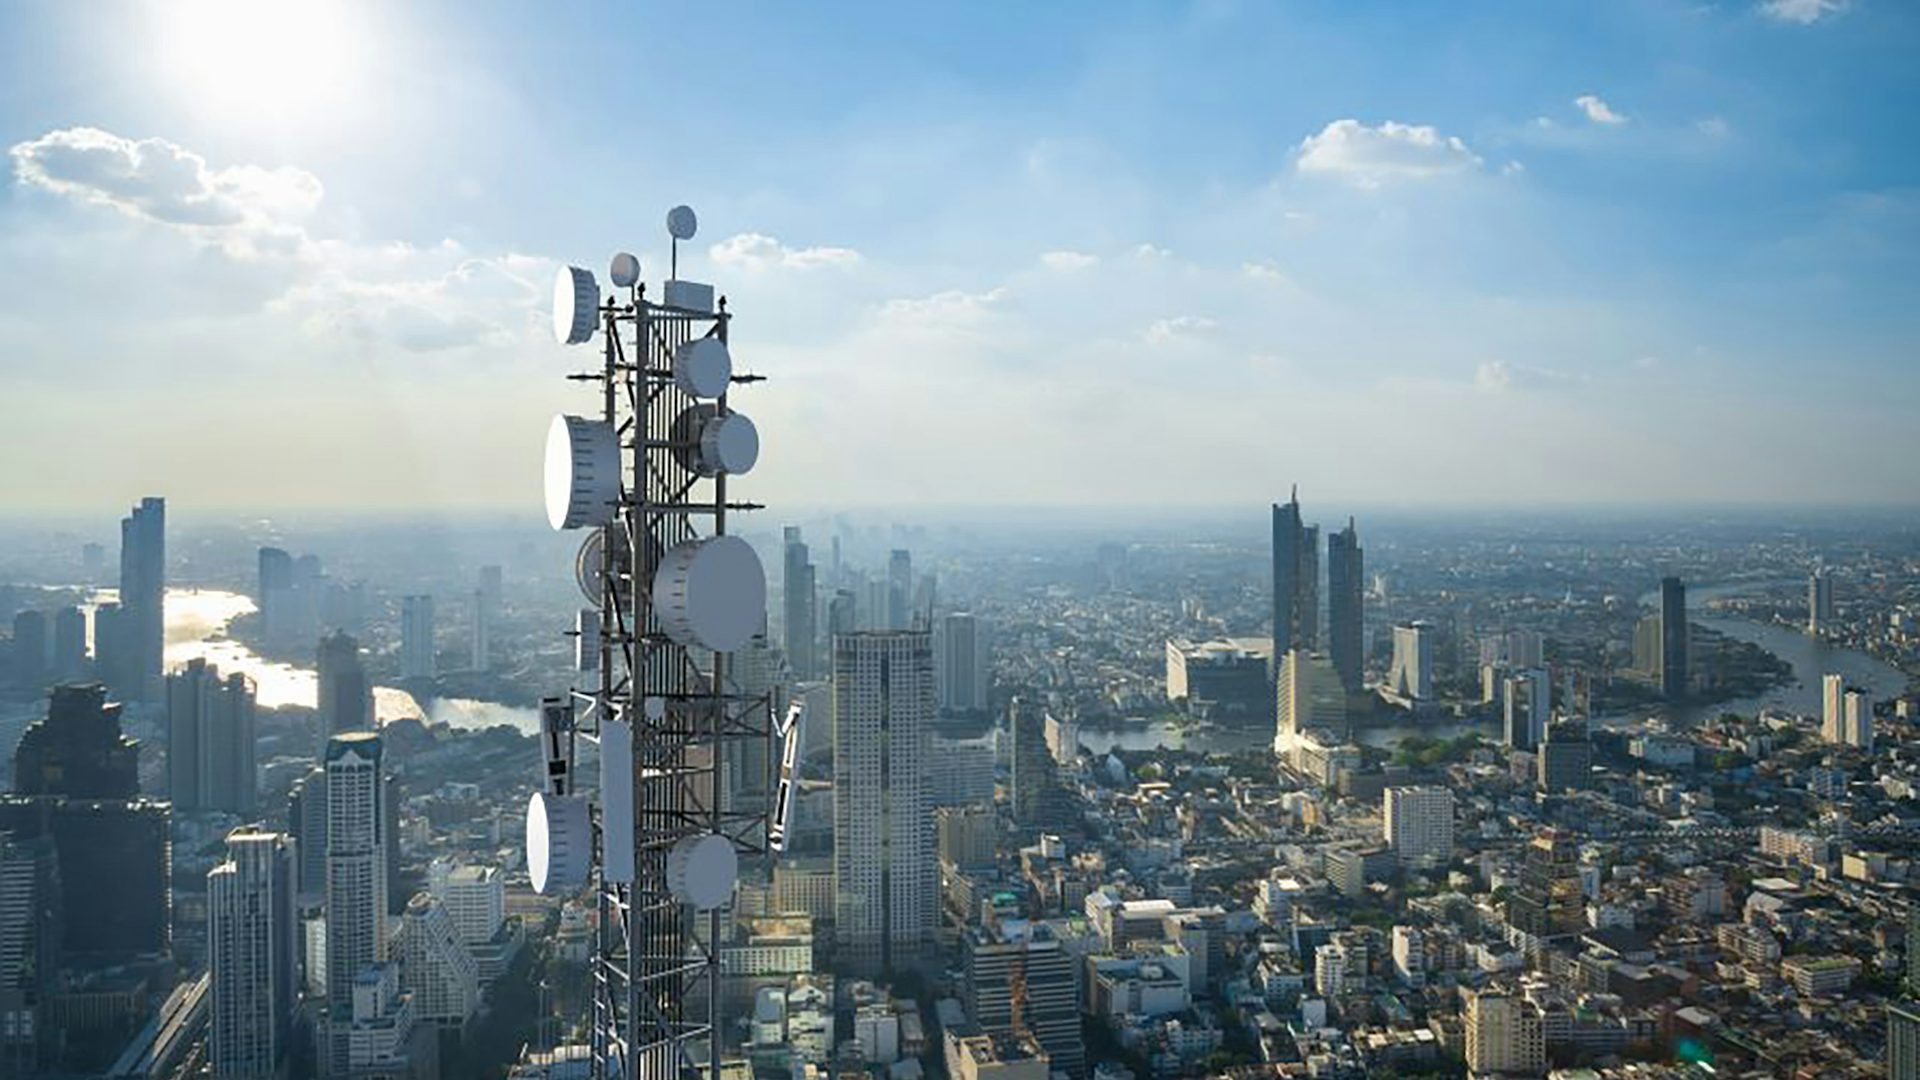 5G tower in a large city